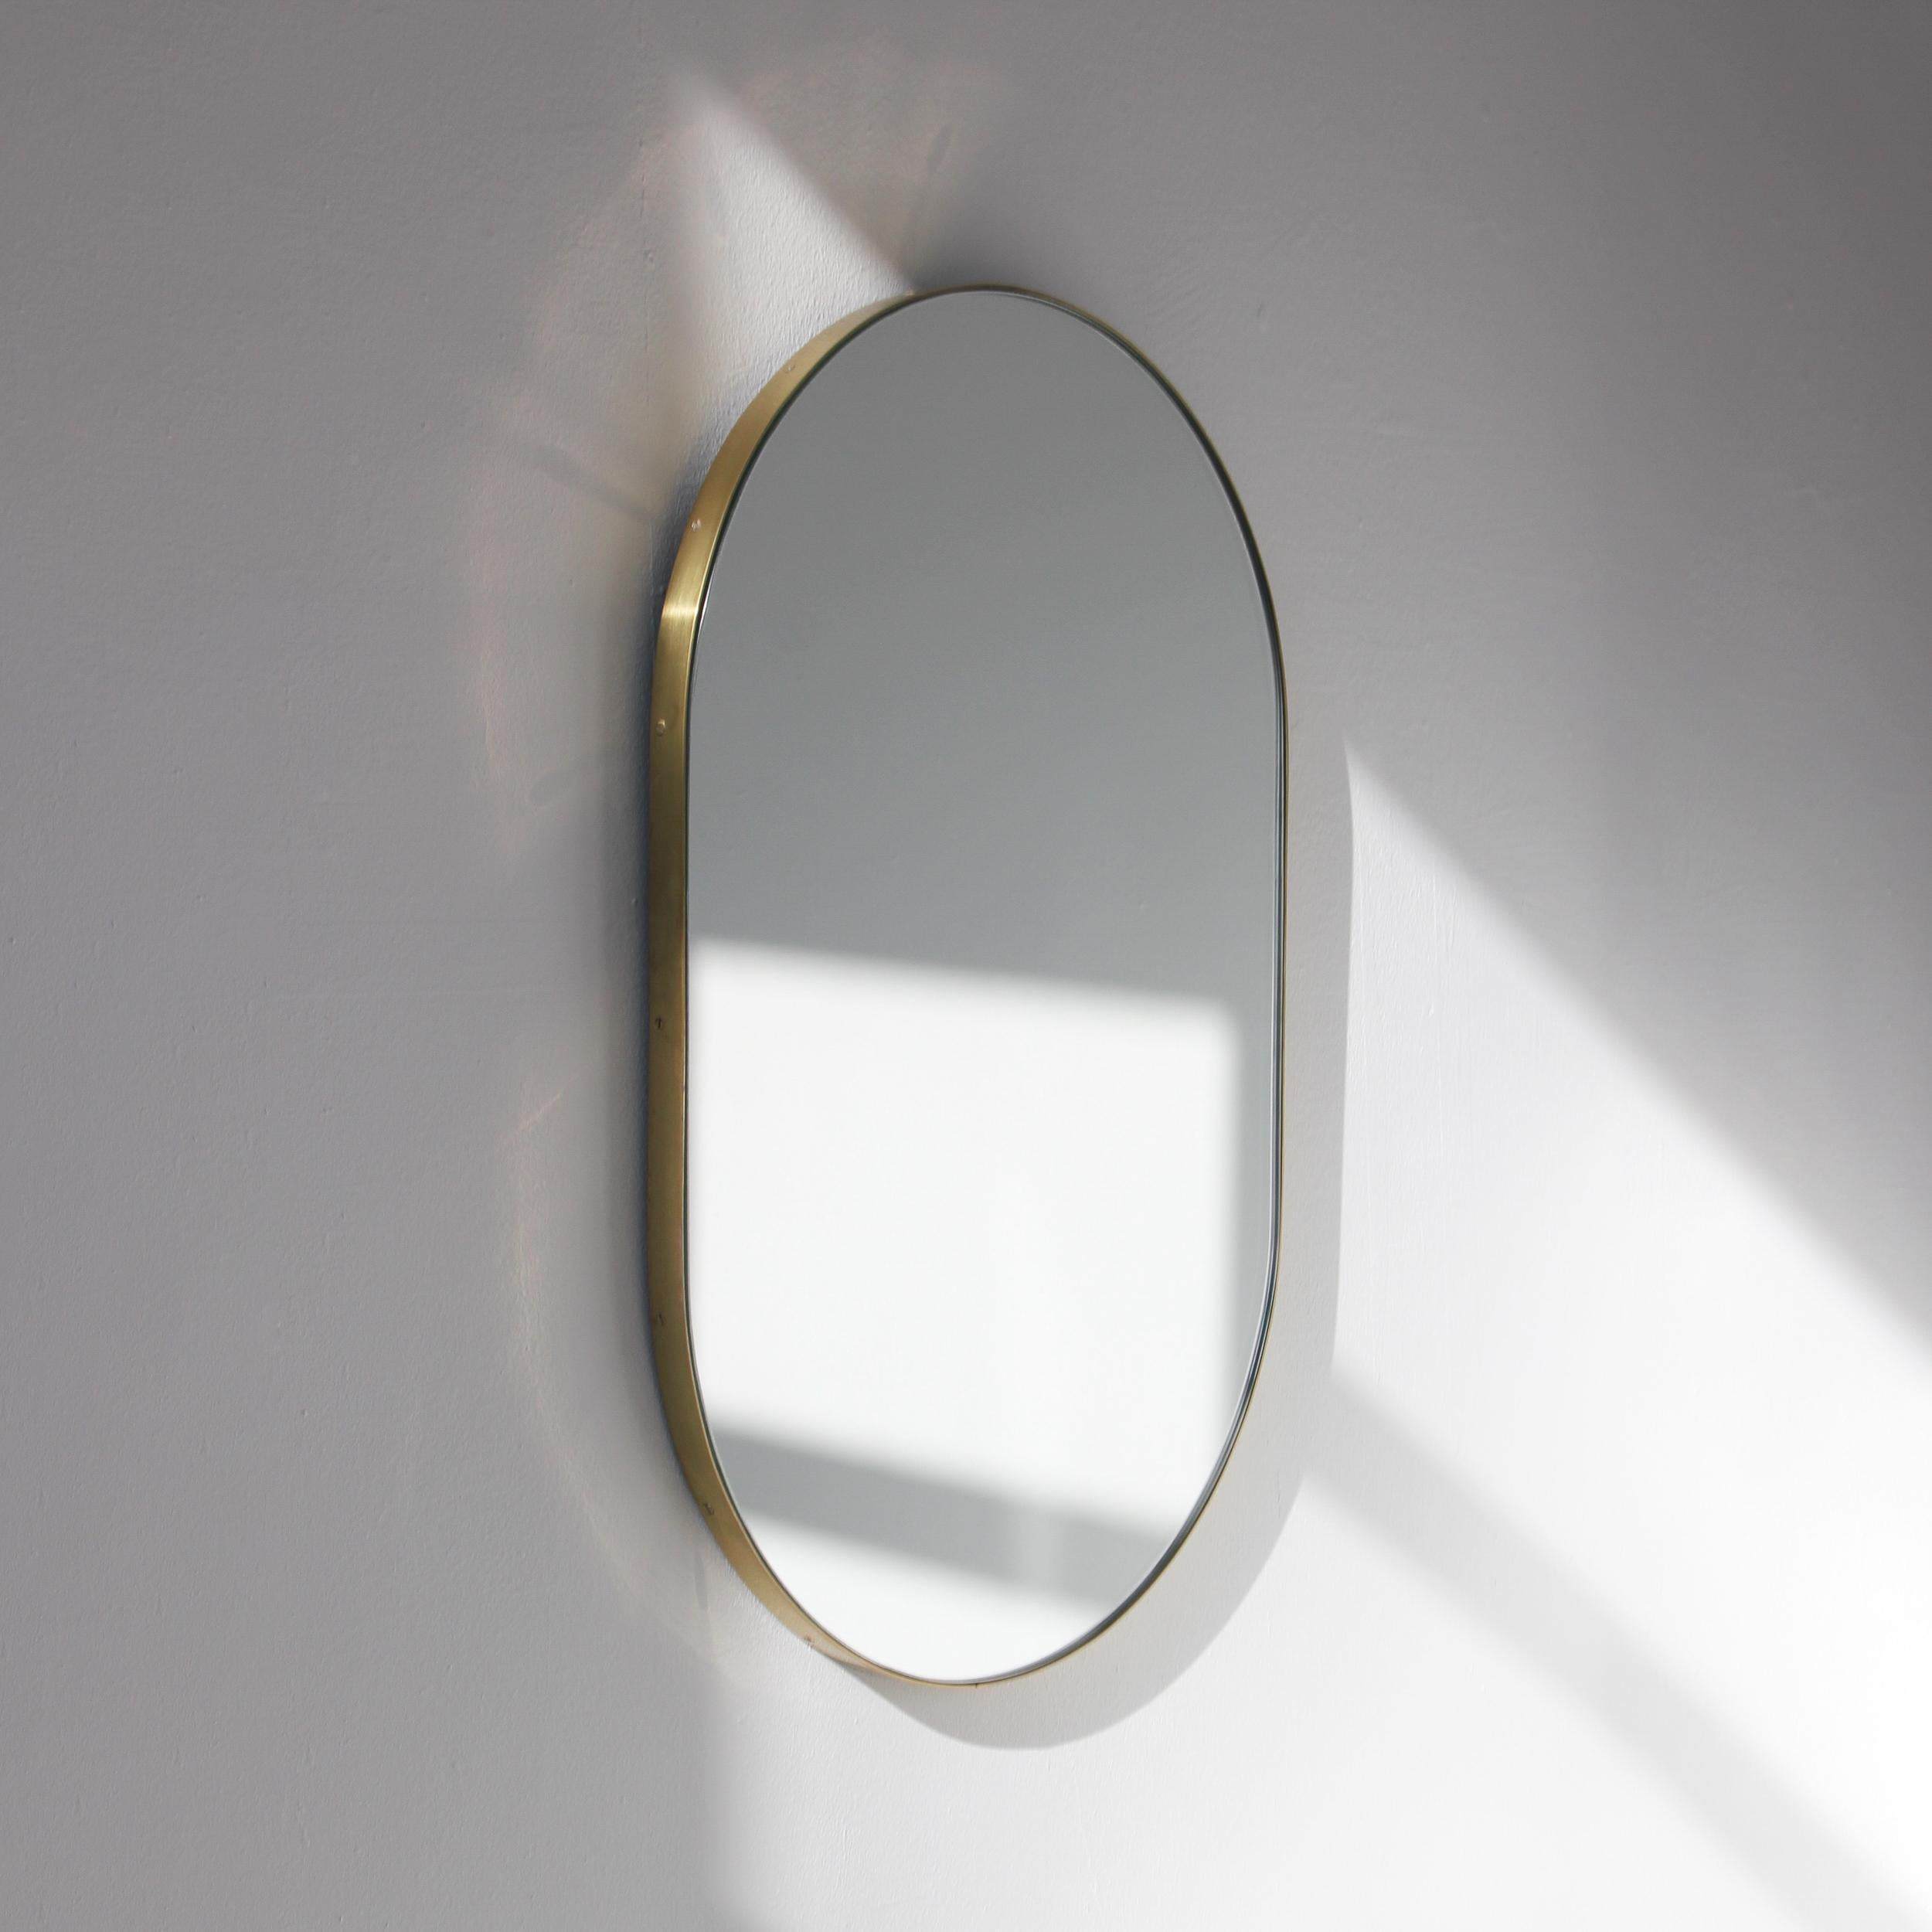 British In Stock Capsula Pill Shaped Mirror with Demister Pad, Brass Frame, XL